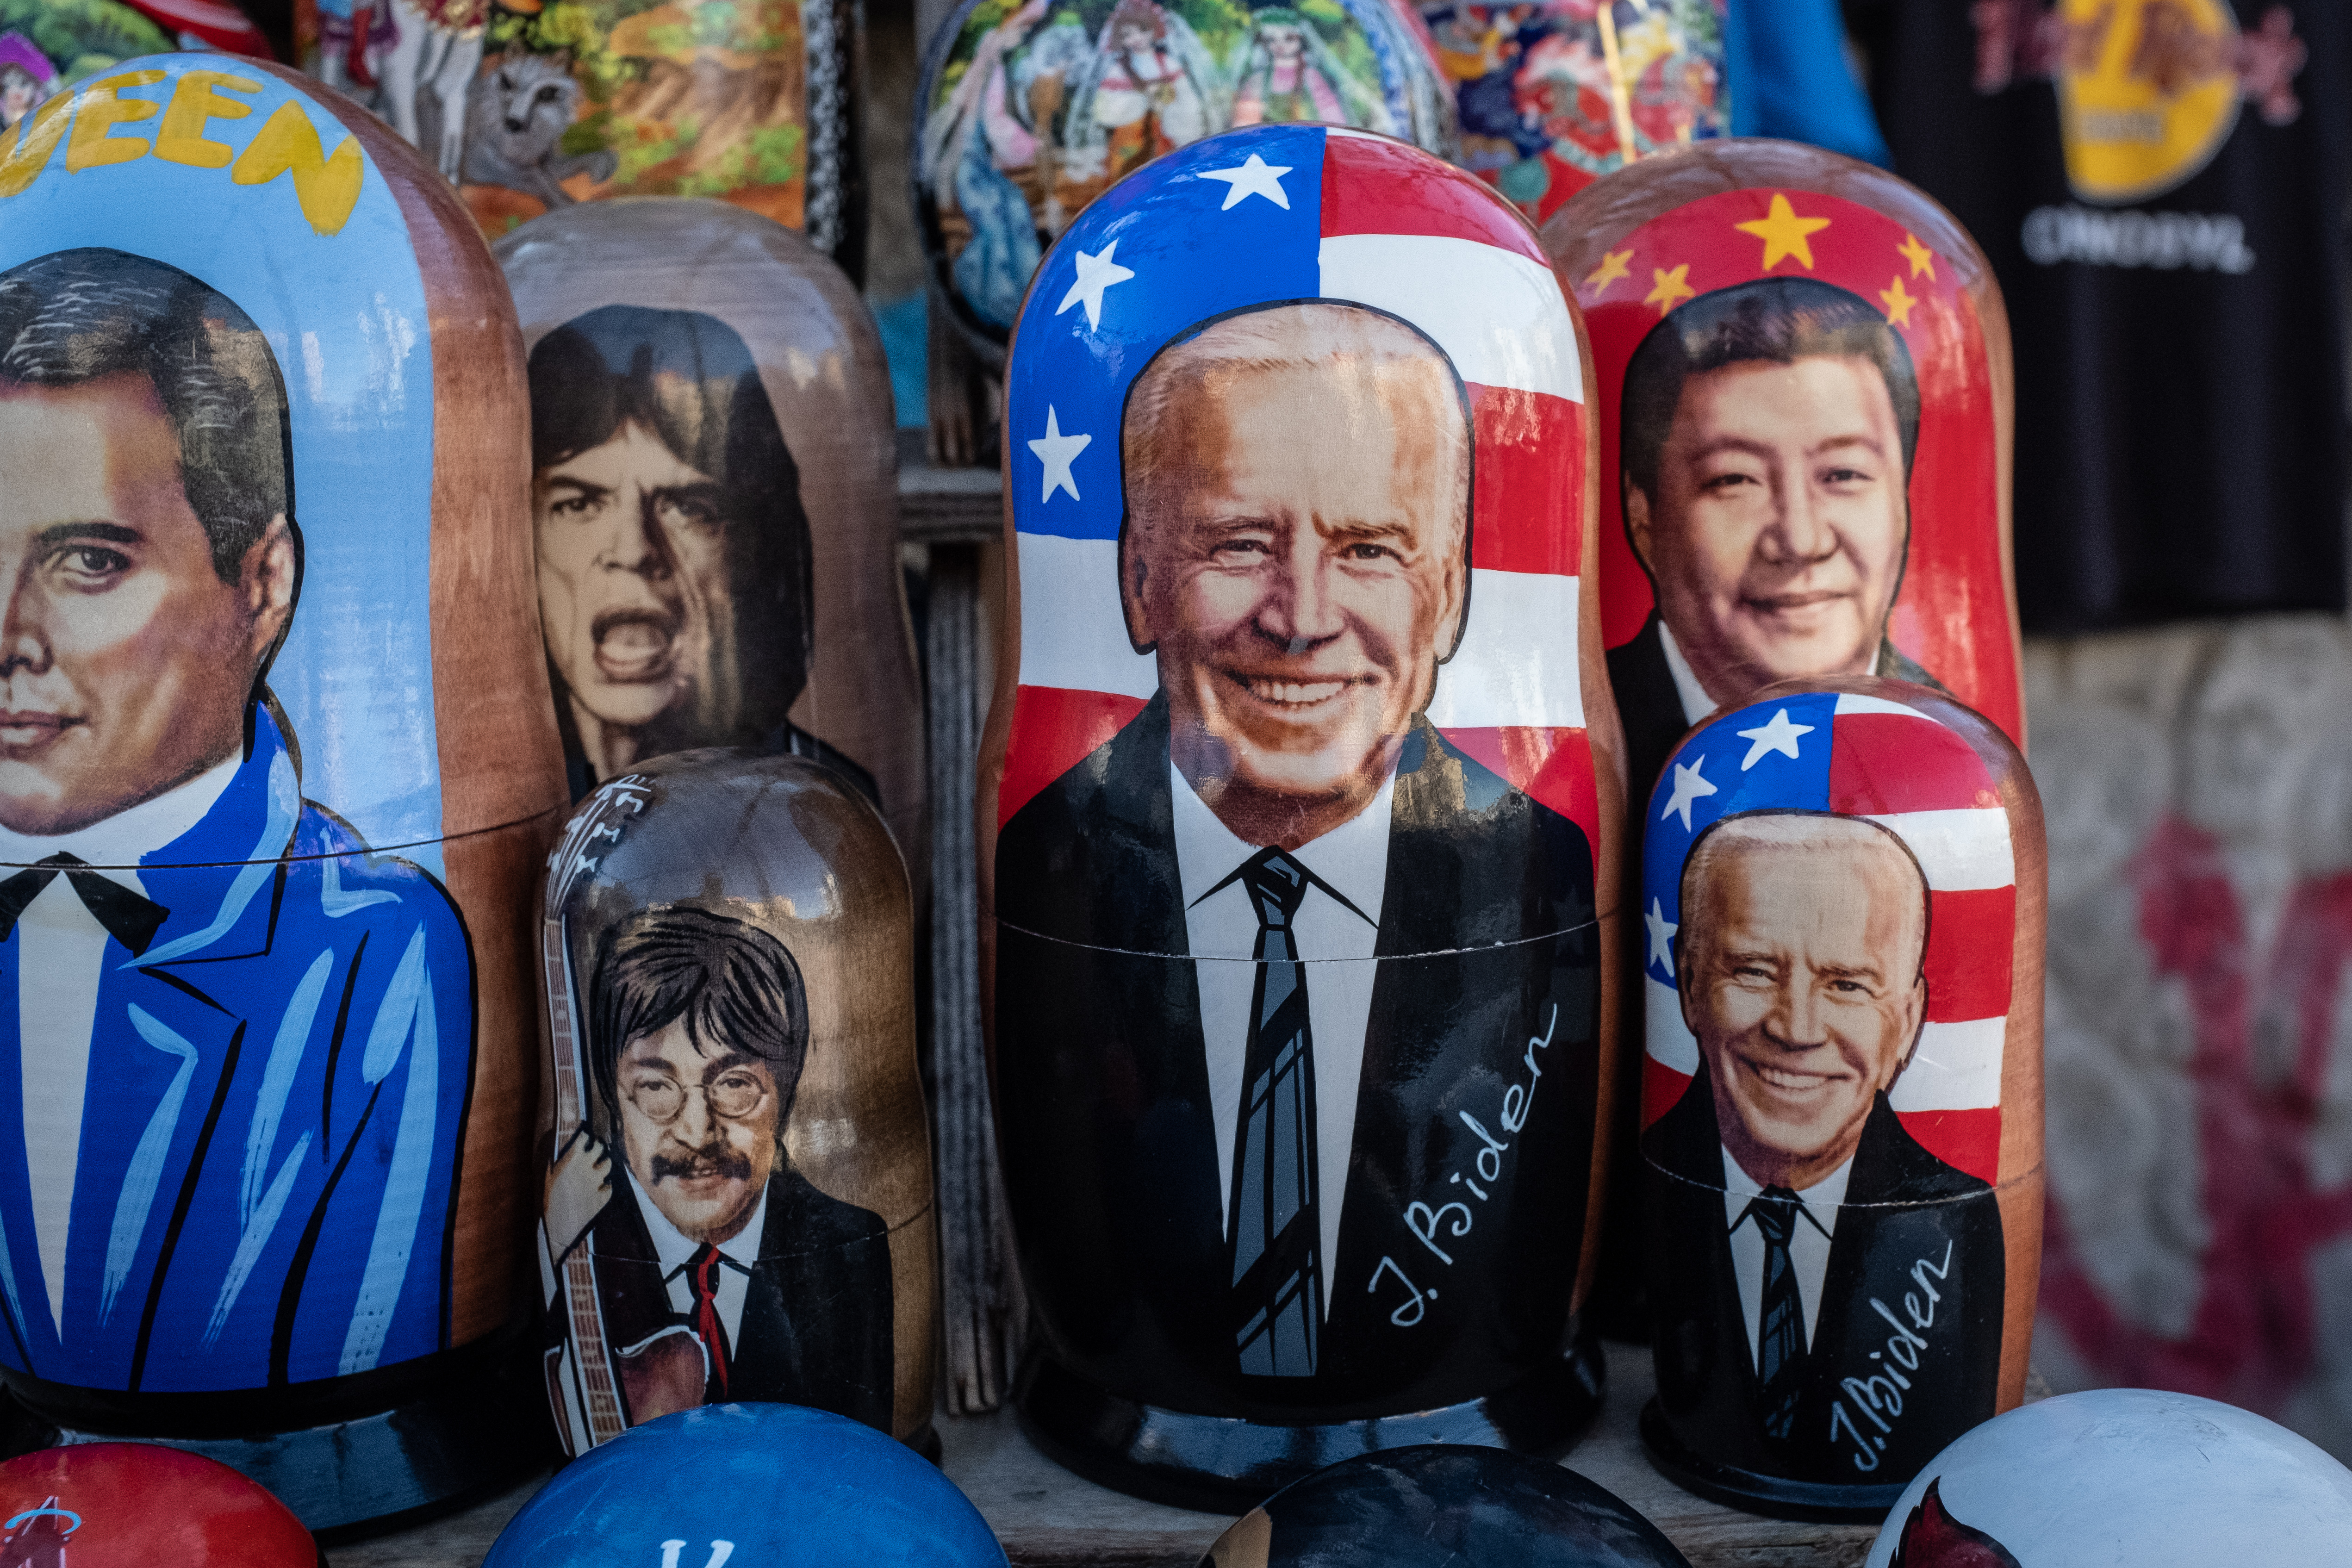 Joe Biden and Chinese leader Xi Jinping shown on souvenirs for sale in Kyiv